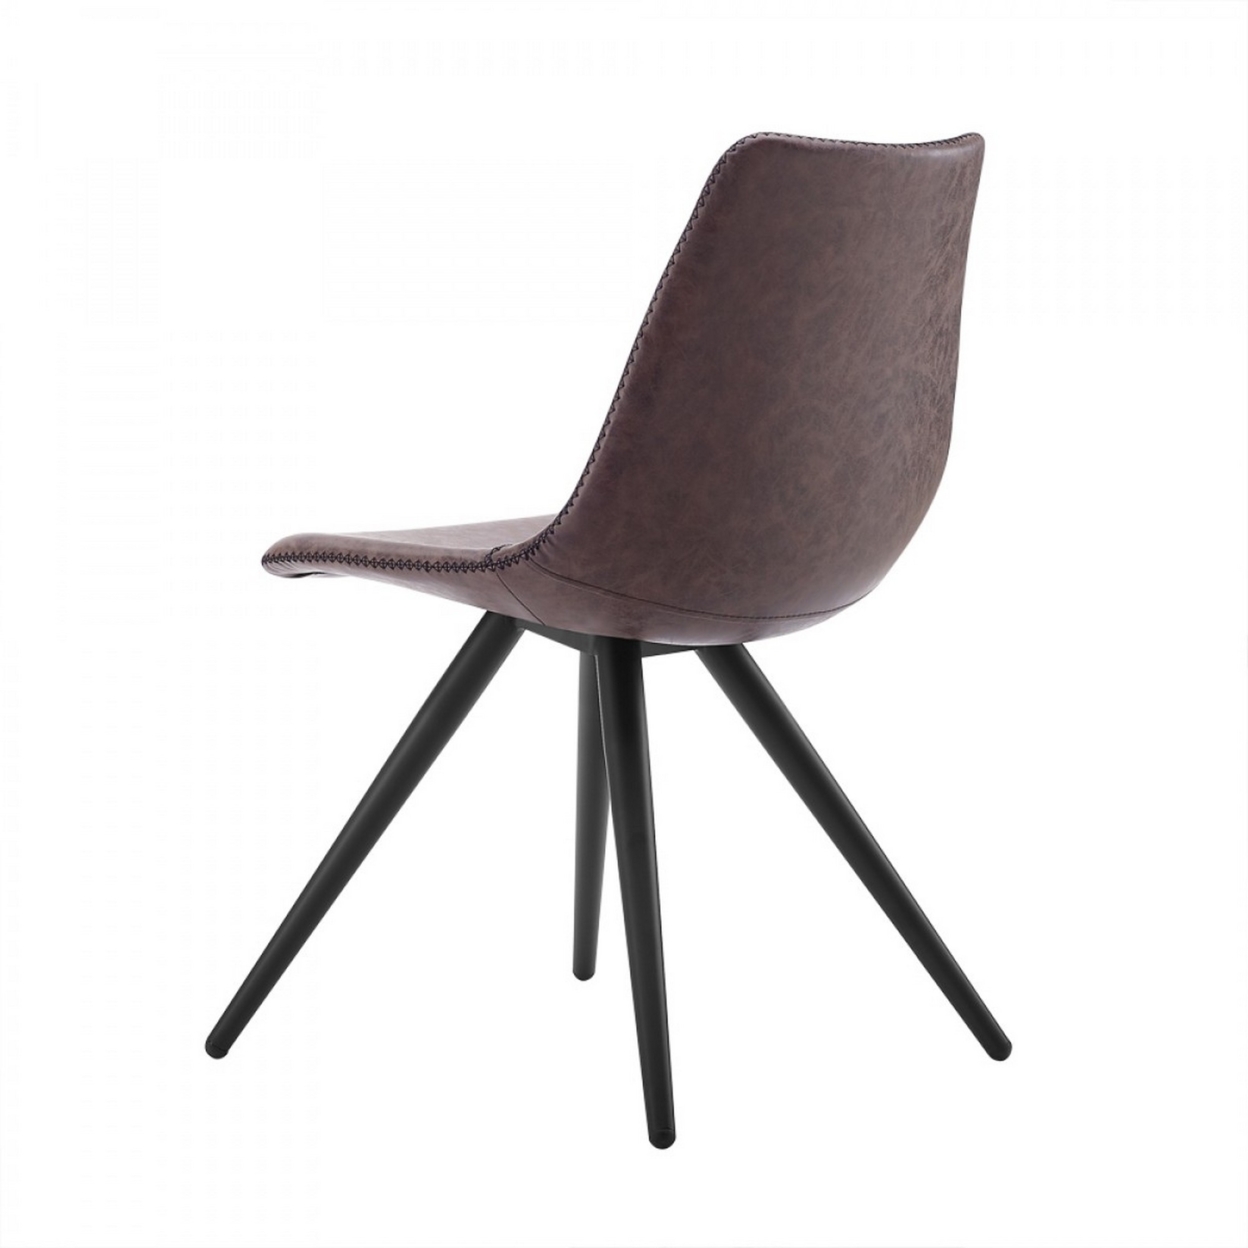 Leatherette Curved Dining Chair With Angled Legs, Set Of 2, Brown And Black- Saltoro Sherpi